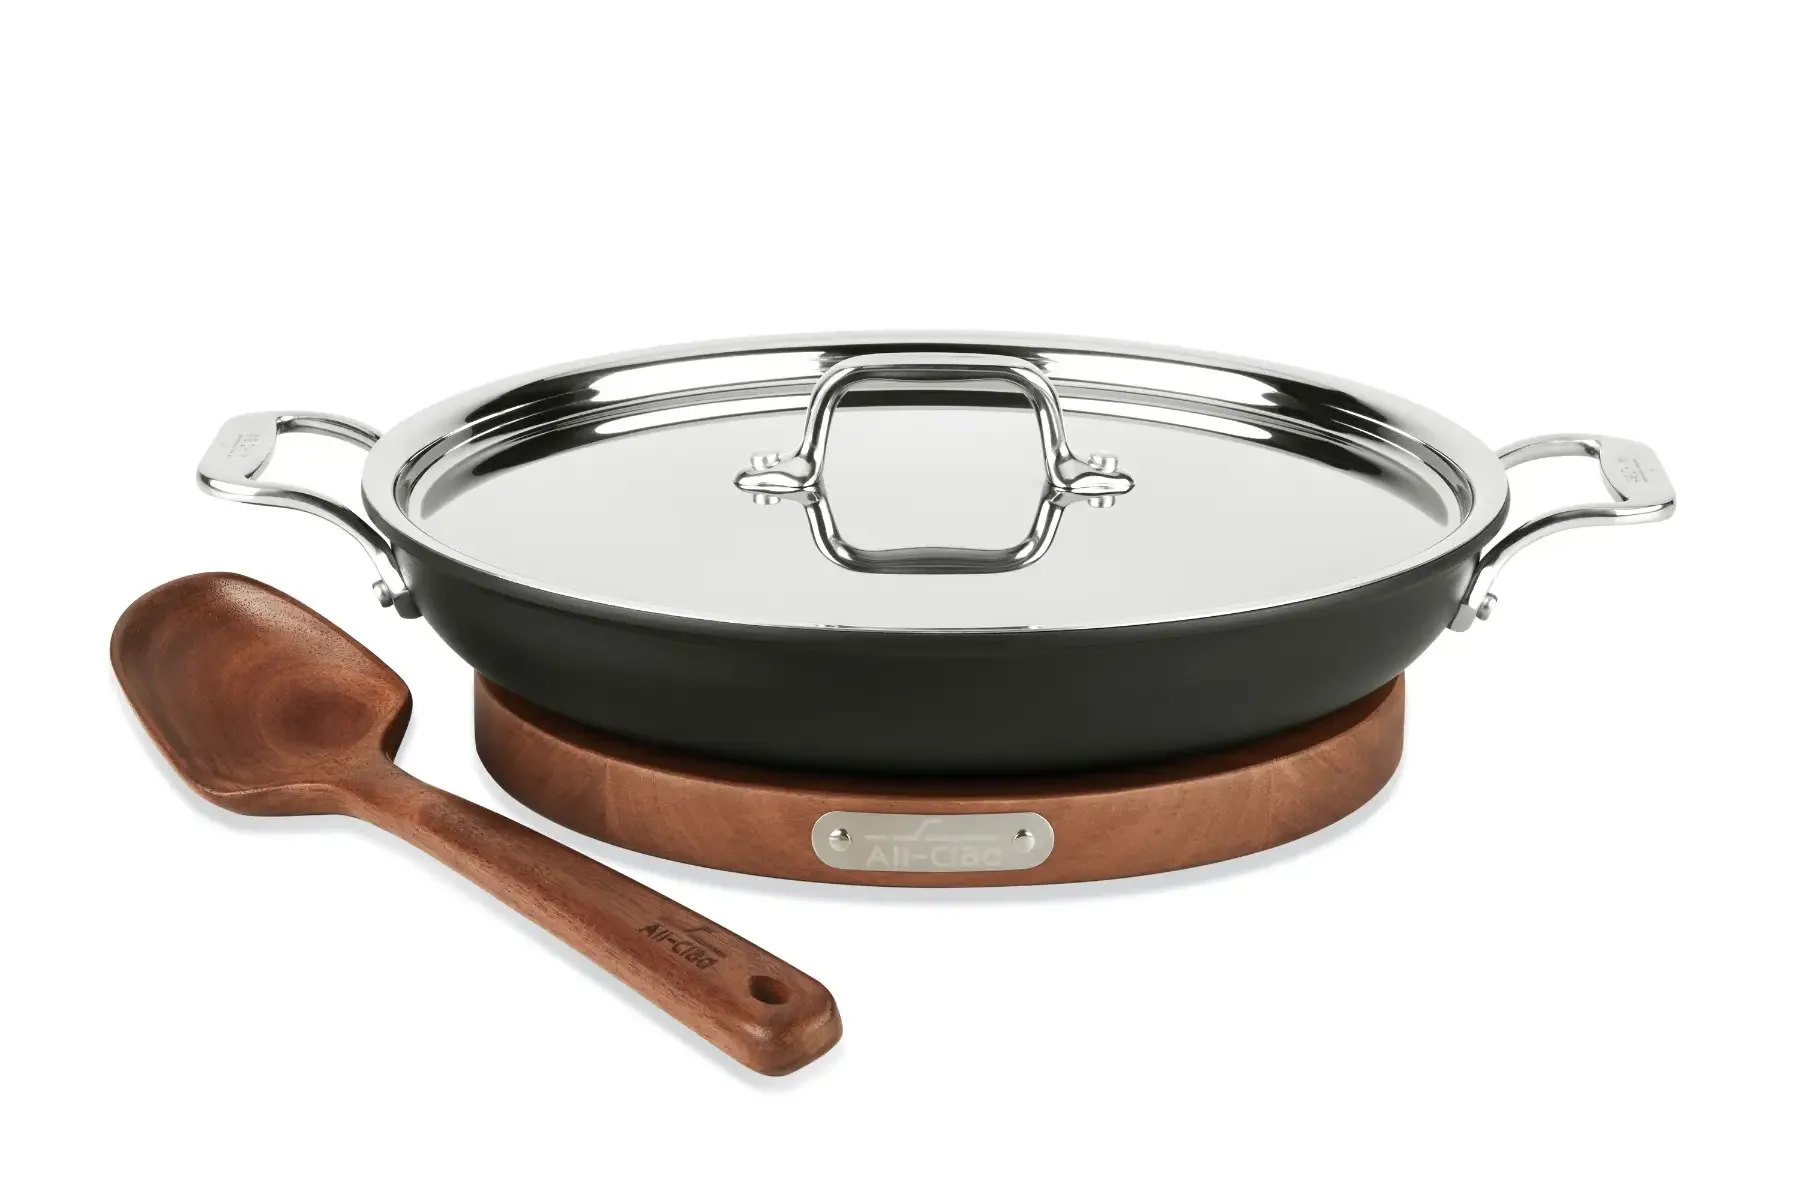 All-Clad: Save big on nonstick cookware at this huge warehouse sale